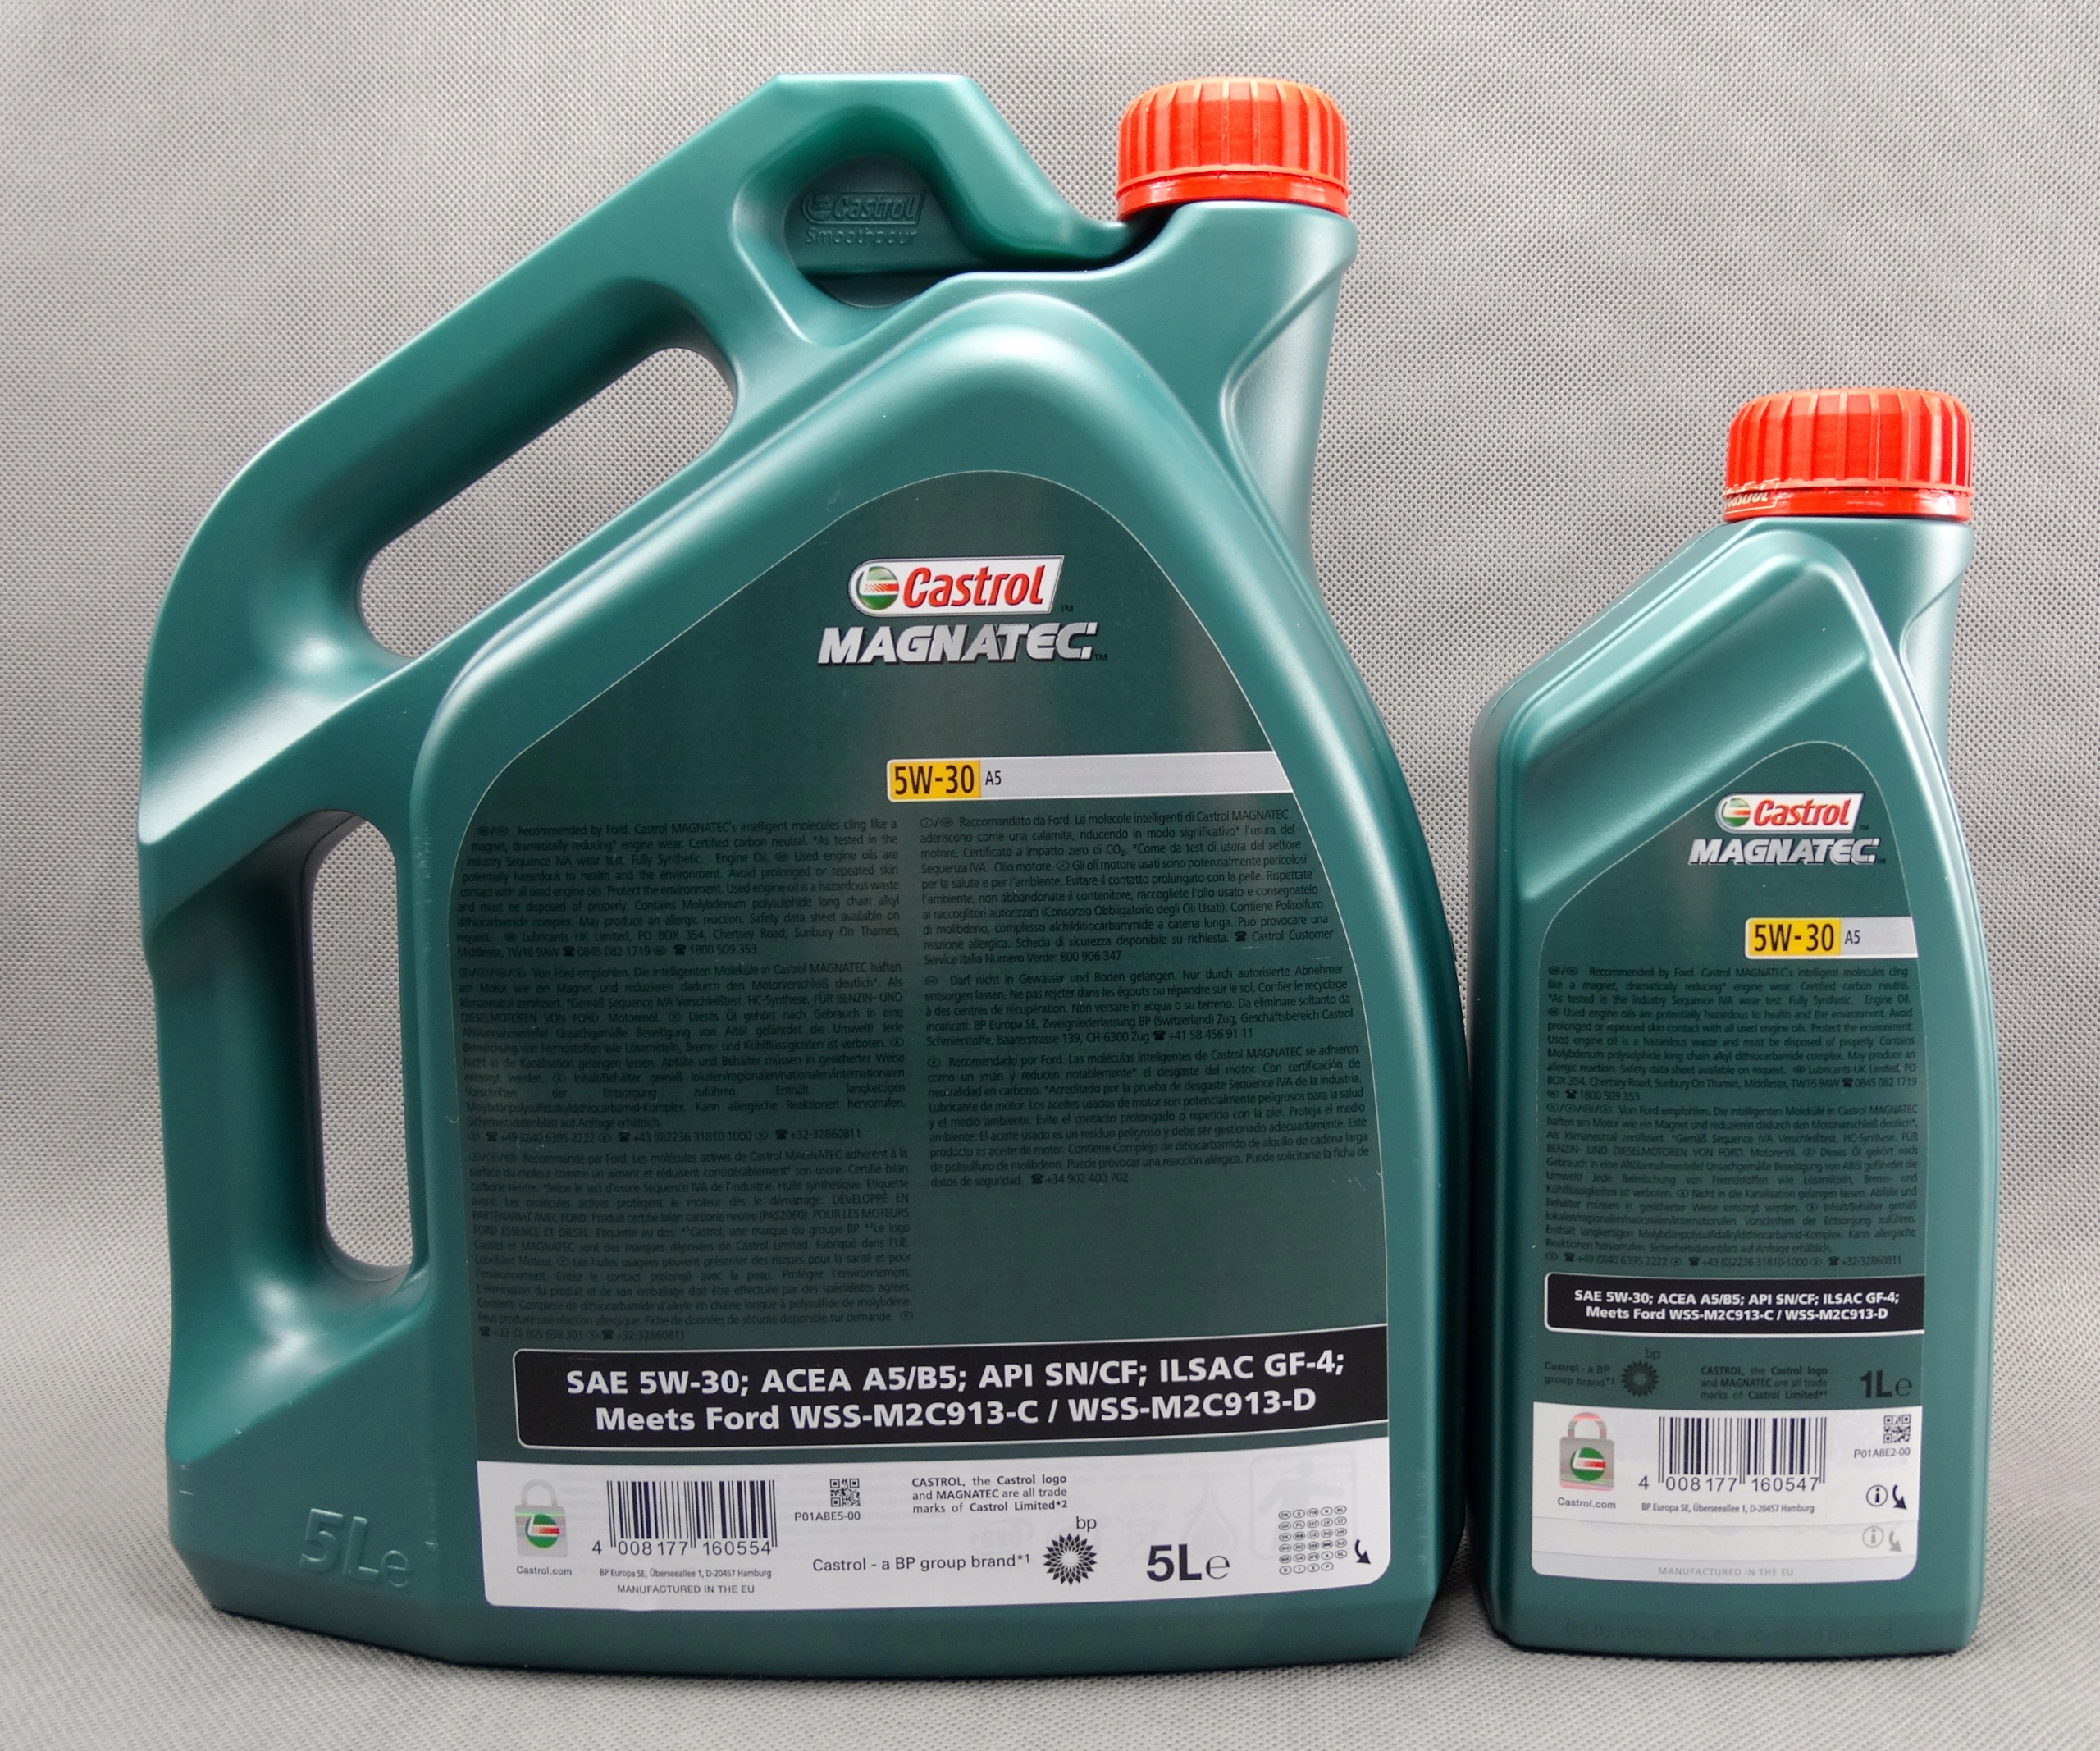 Масло castrol ford. Ford Magnatec 5w-30 a5. Castrol Magnatec 5w30. Ford Castrol Magnatec professional a5 5w-30. Ford Castrol Magnatec professional 5w30.